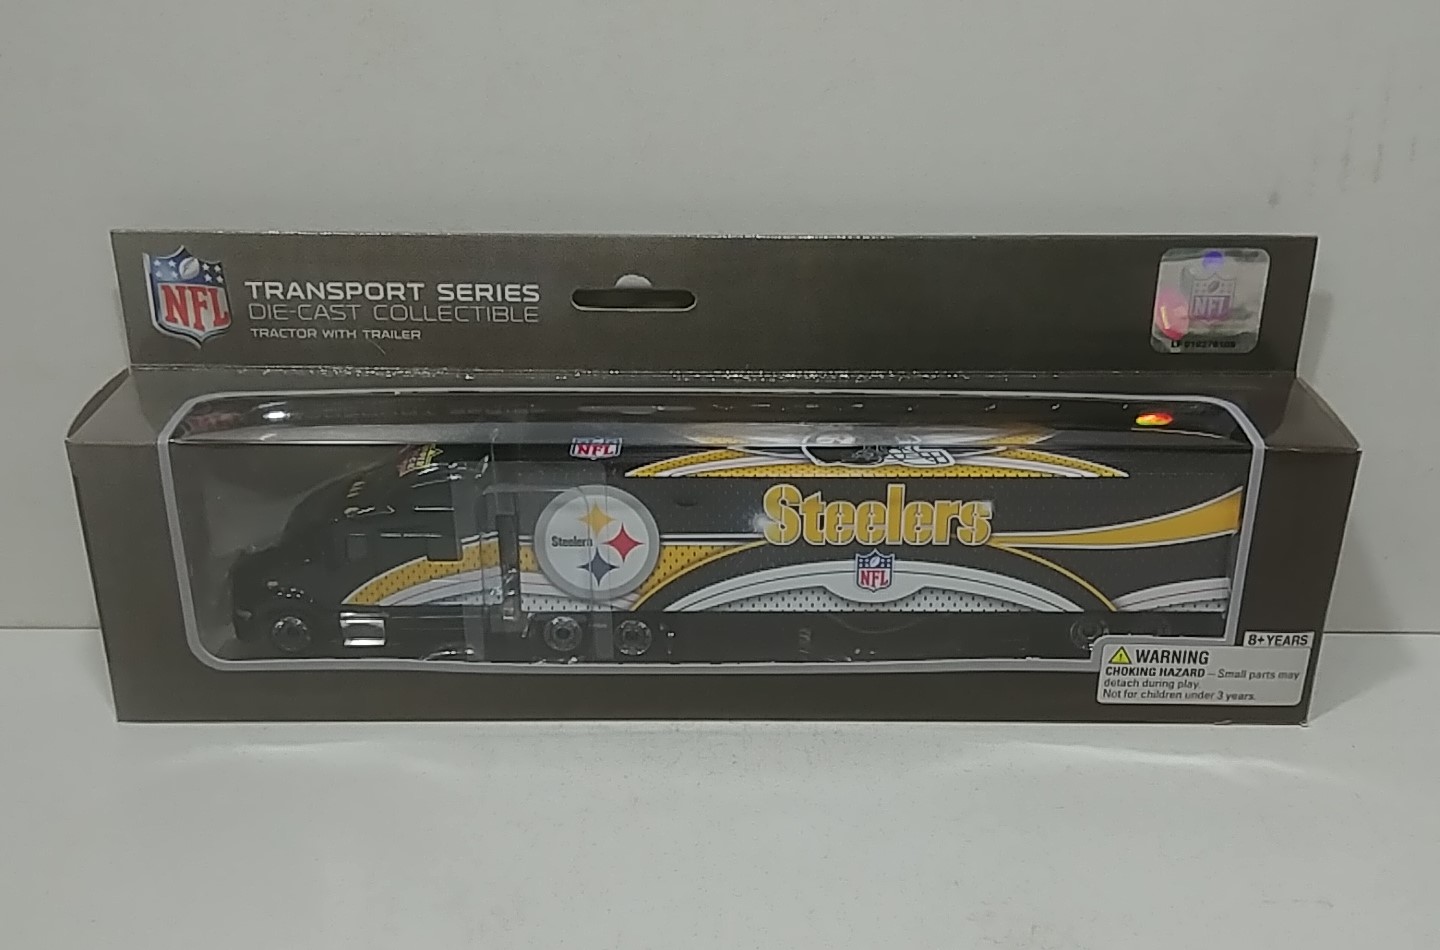 2008 Pittsburgh Steelers 1/80th hauler by Upper Deck